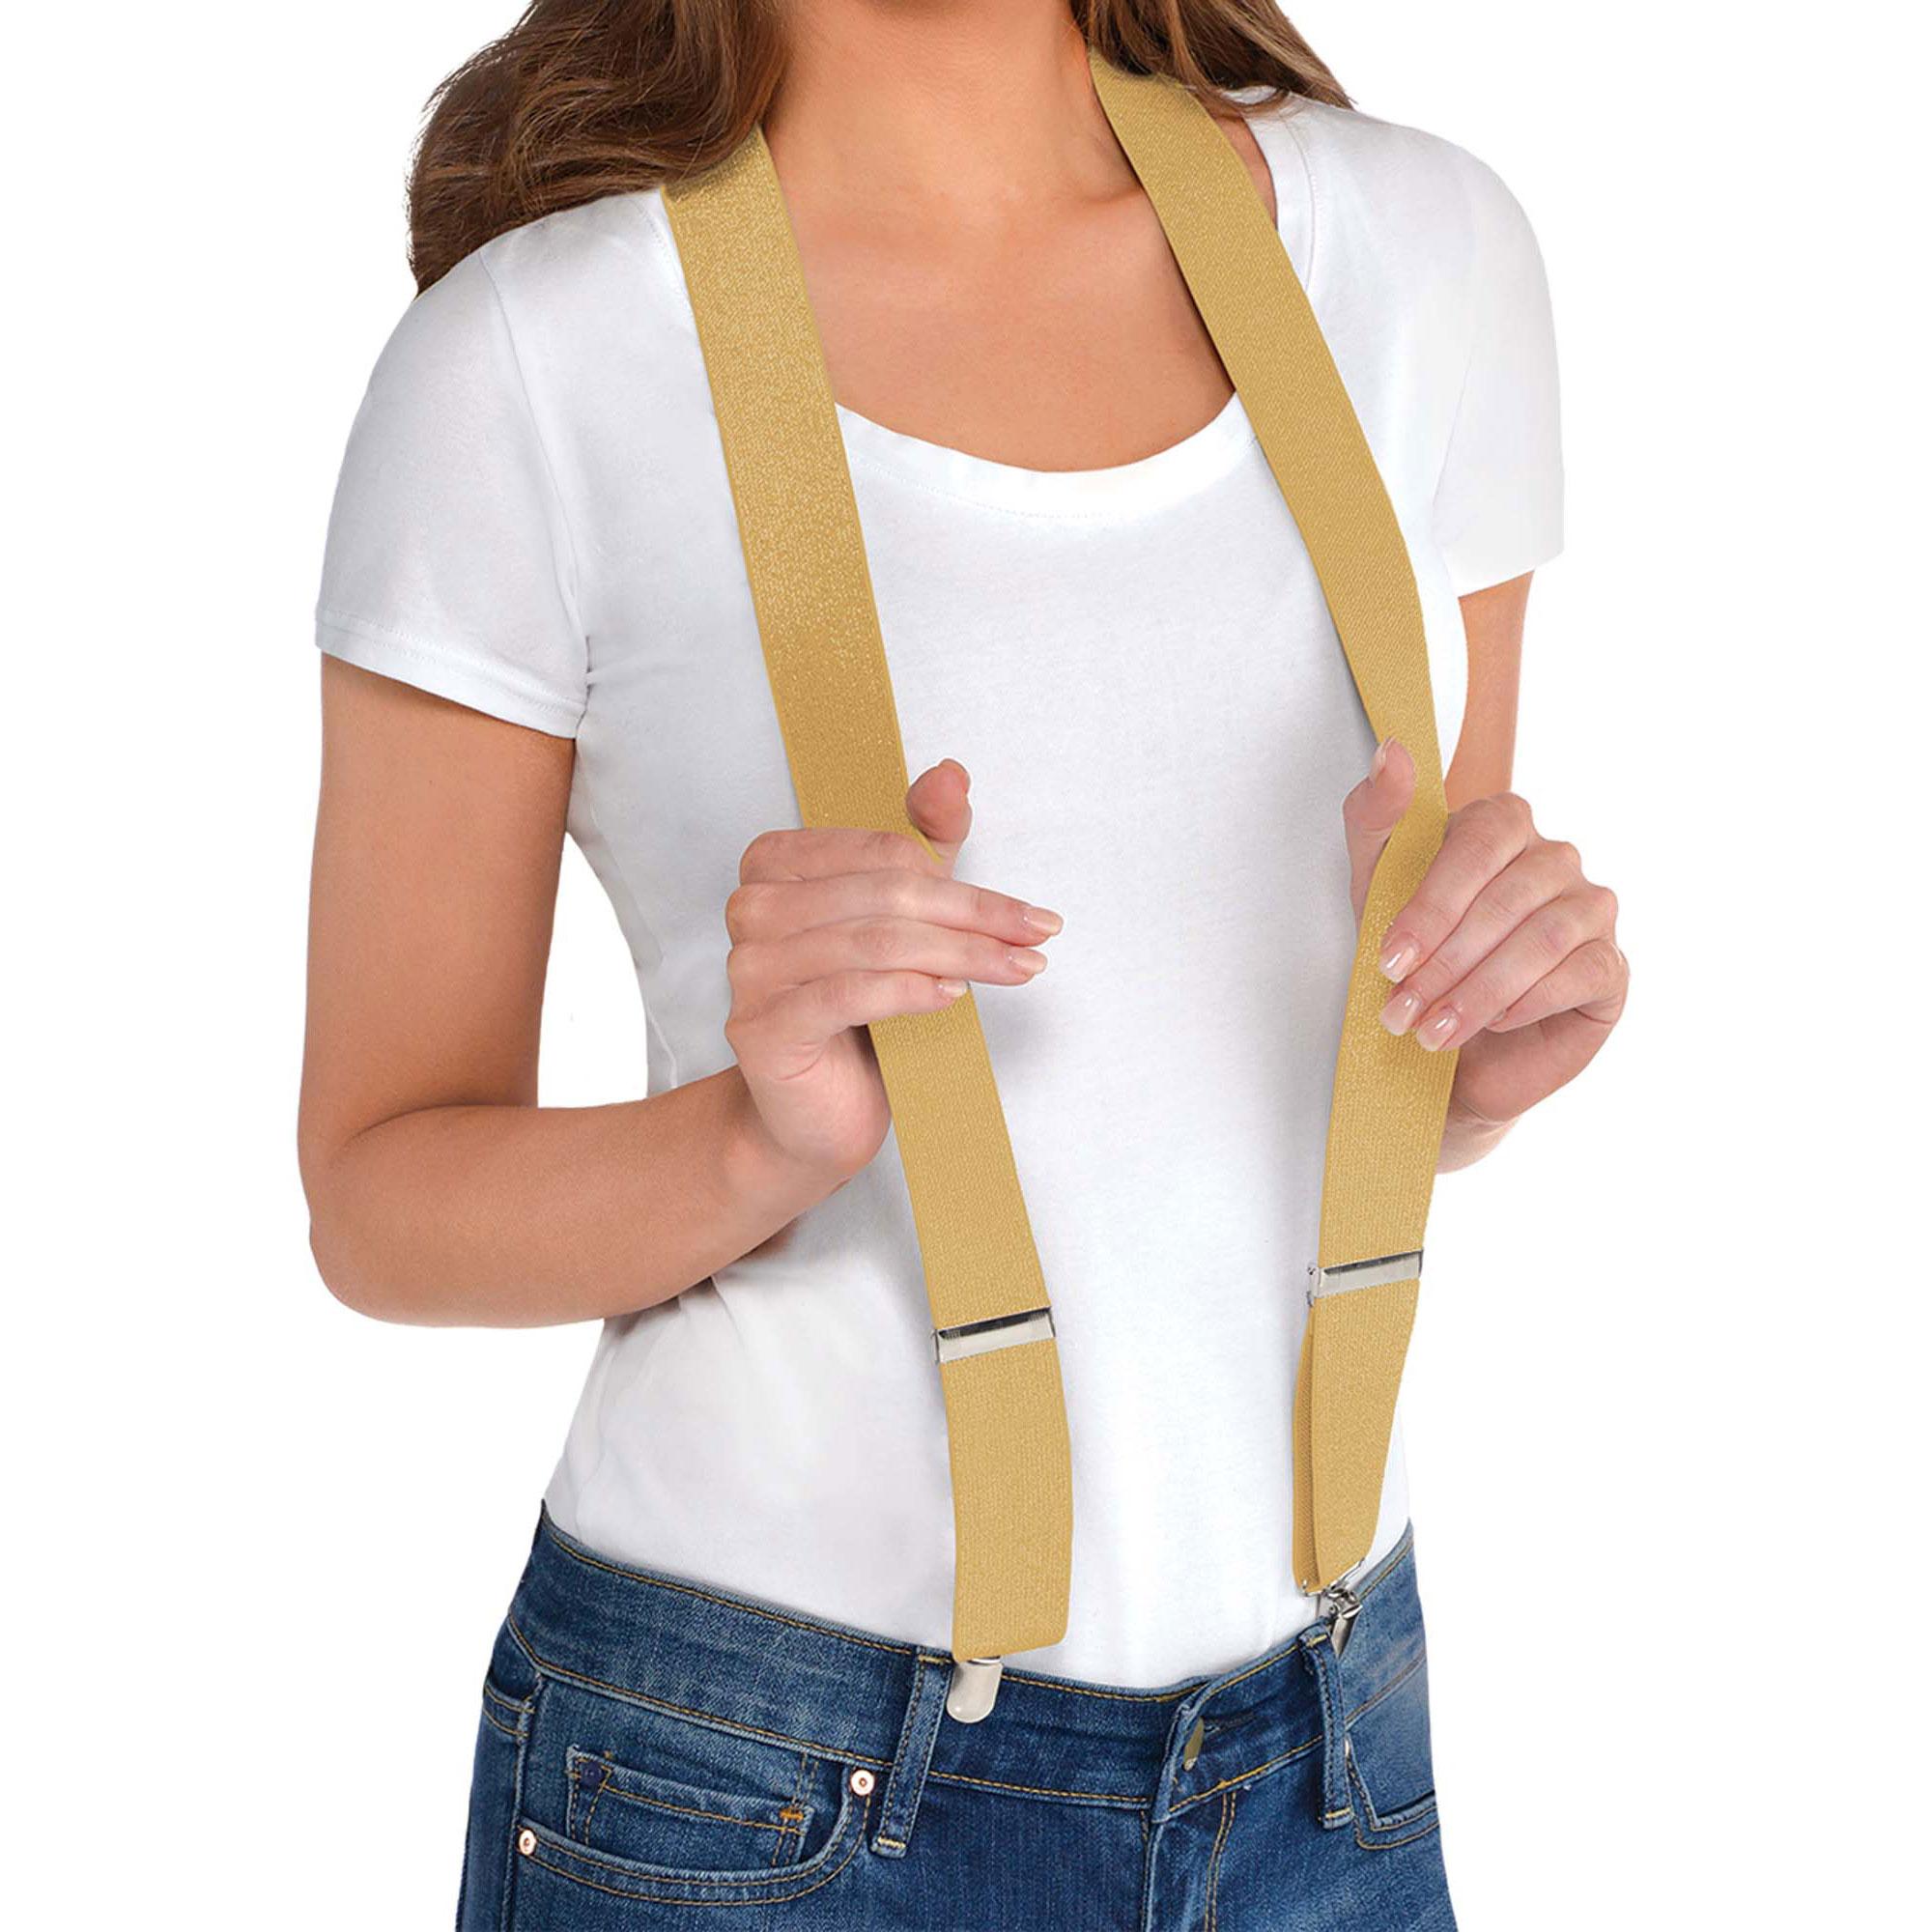 Gold Suspenders Costumes & Apparel - Party Centre